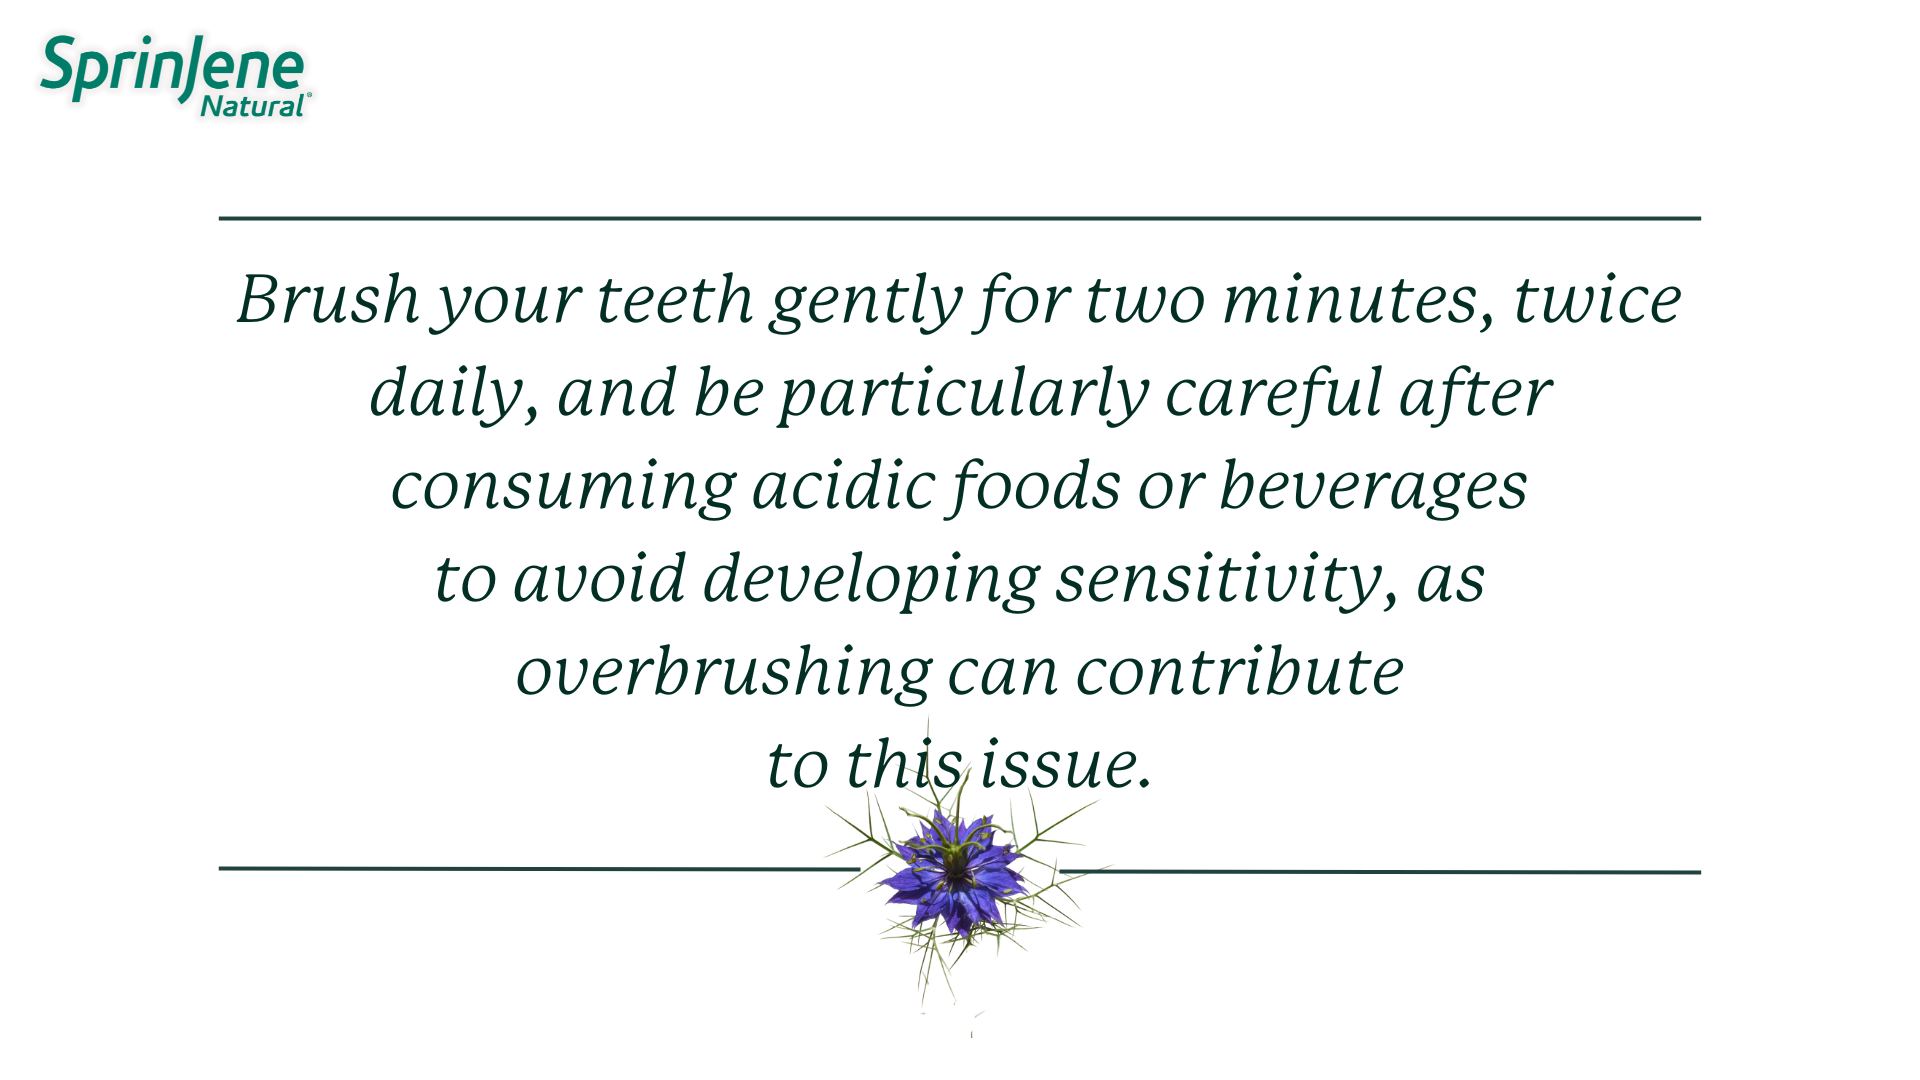 Brush your teeth gently for two minutes, twice daily, and be particularly careful after consuming acidic foods or beverages to avoid developing sensitivity, as overbrushing can contribute to this issue.